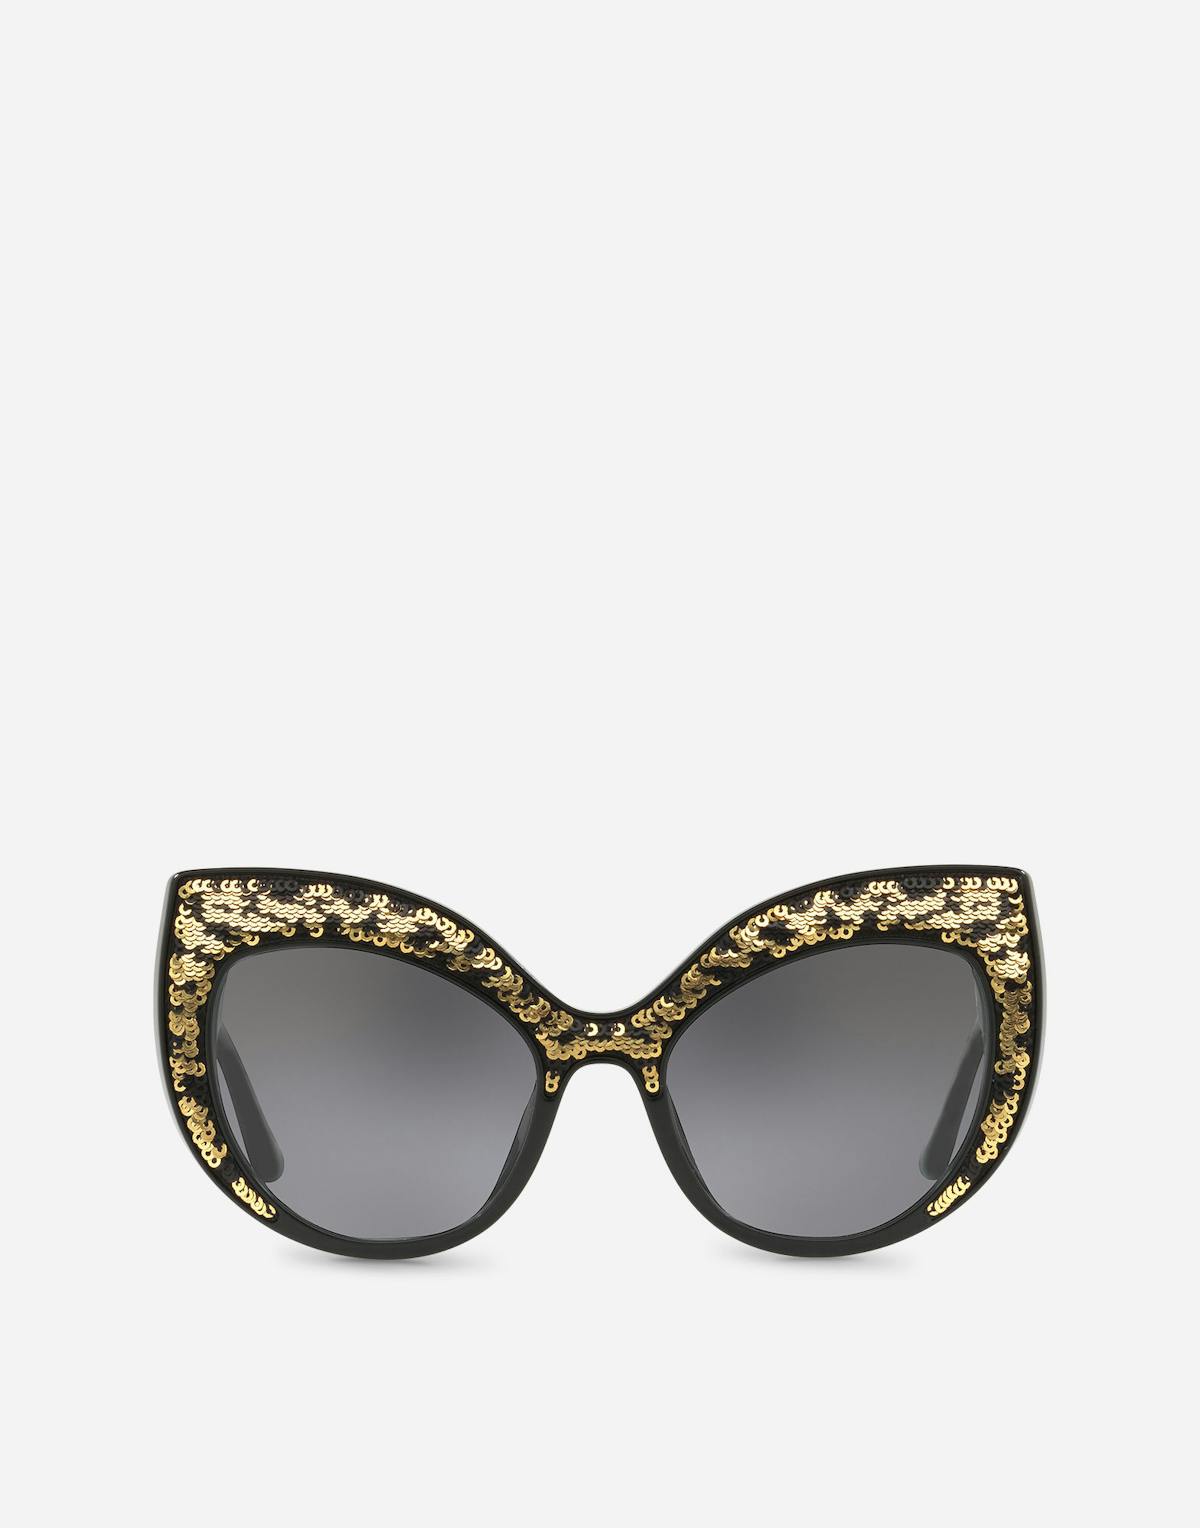 Summer shopping: 24 of the most stylish sunglasses